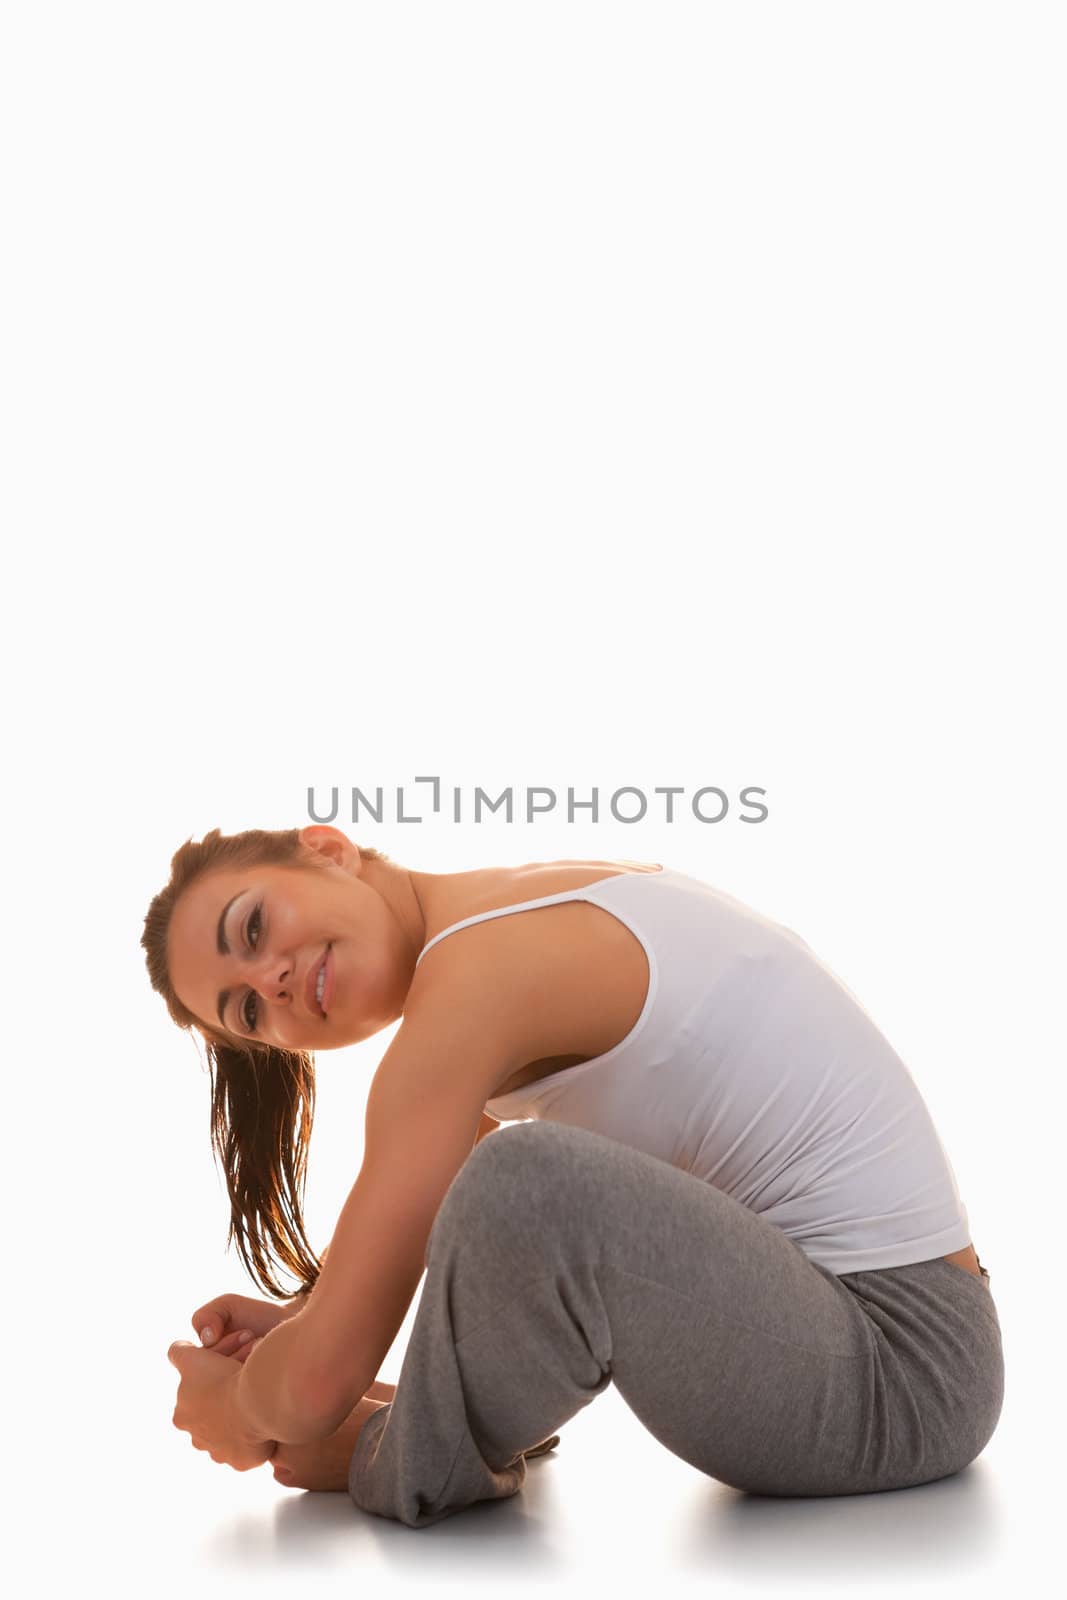 Portrait of a young woman stretching her legs by Wavebreakmedia